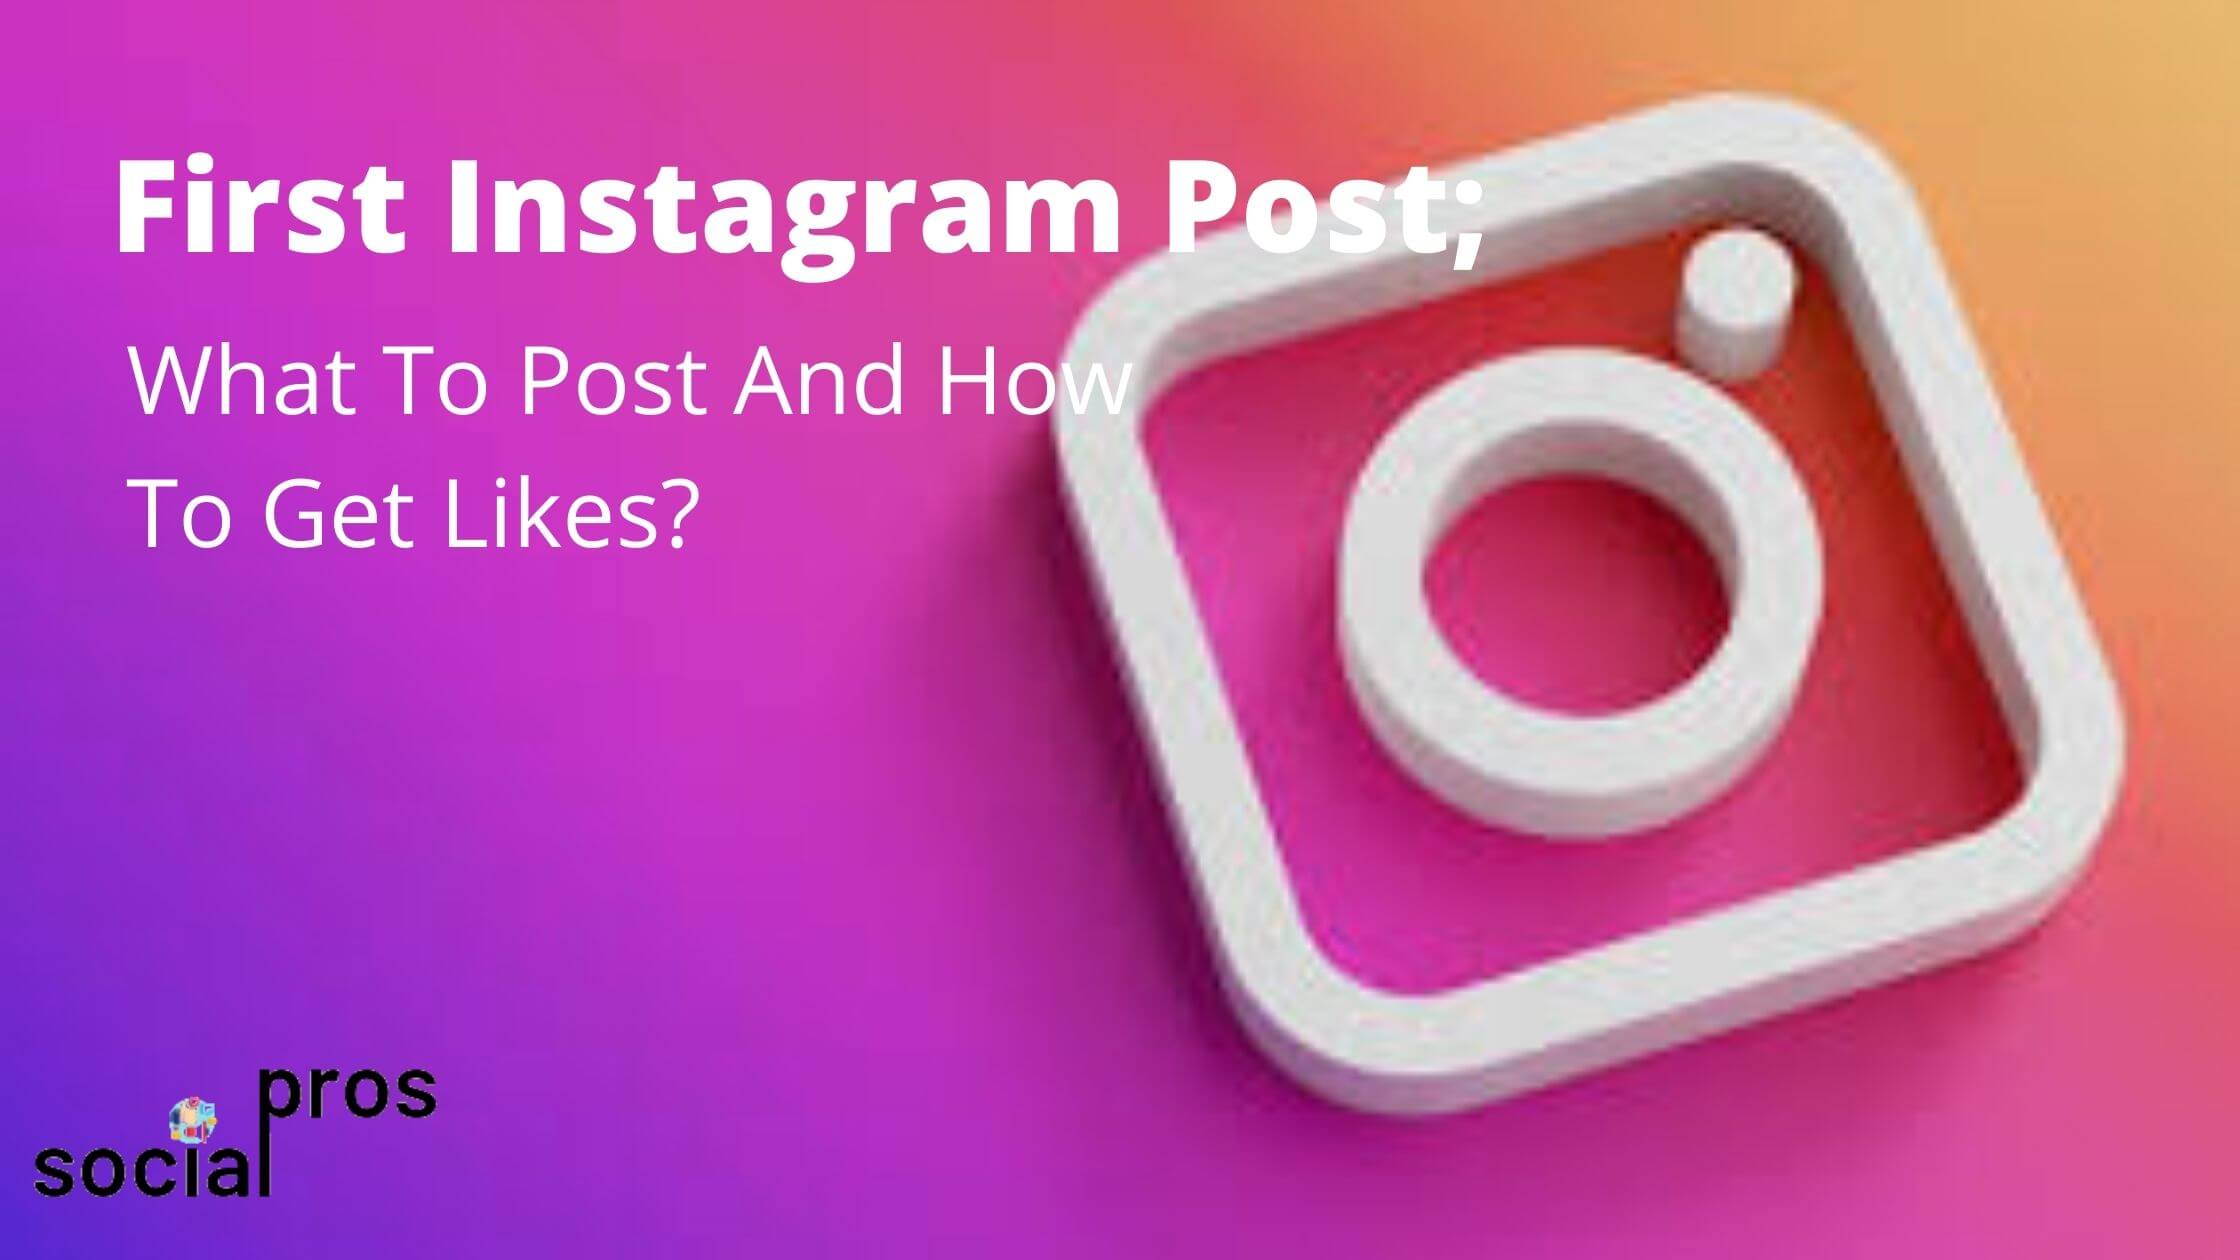 logo of Instagram and embedded phrase saying "First Instagram Post; what to post and how to get likes"